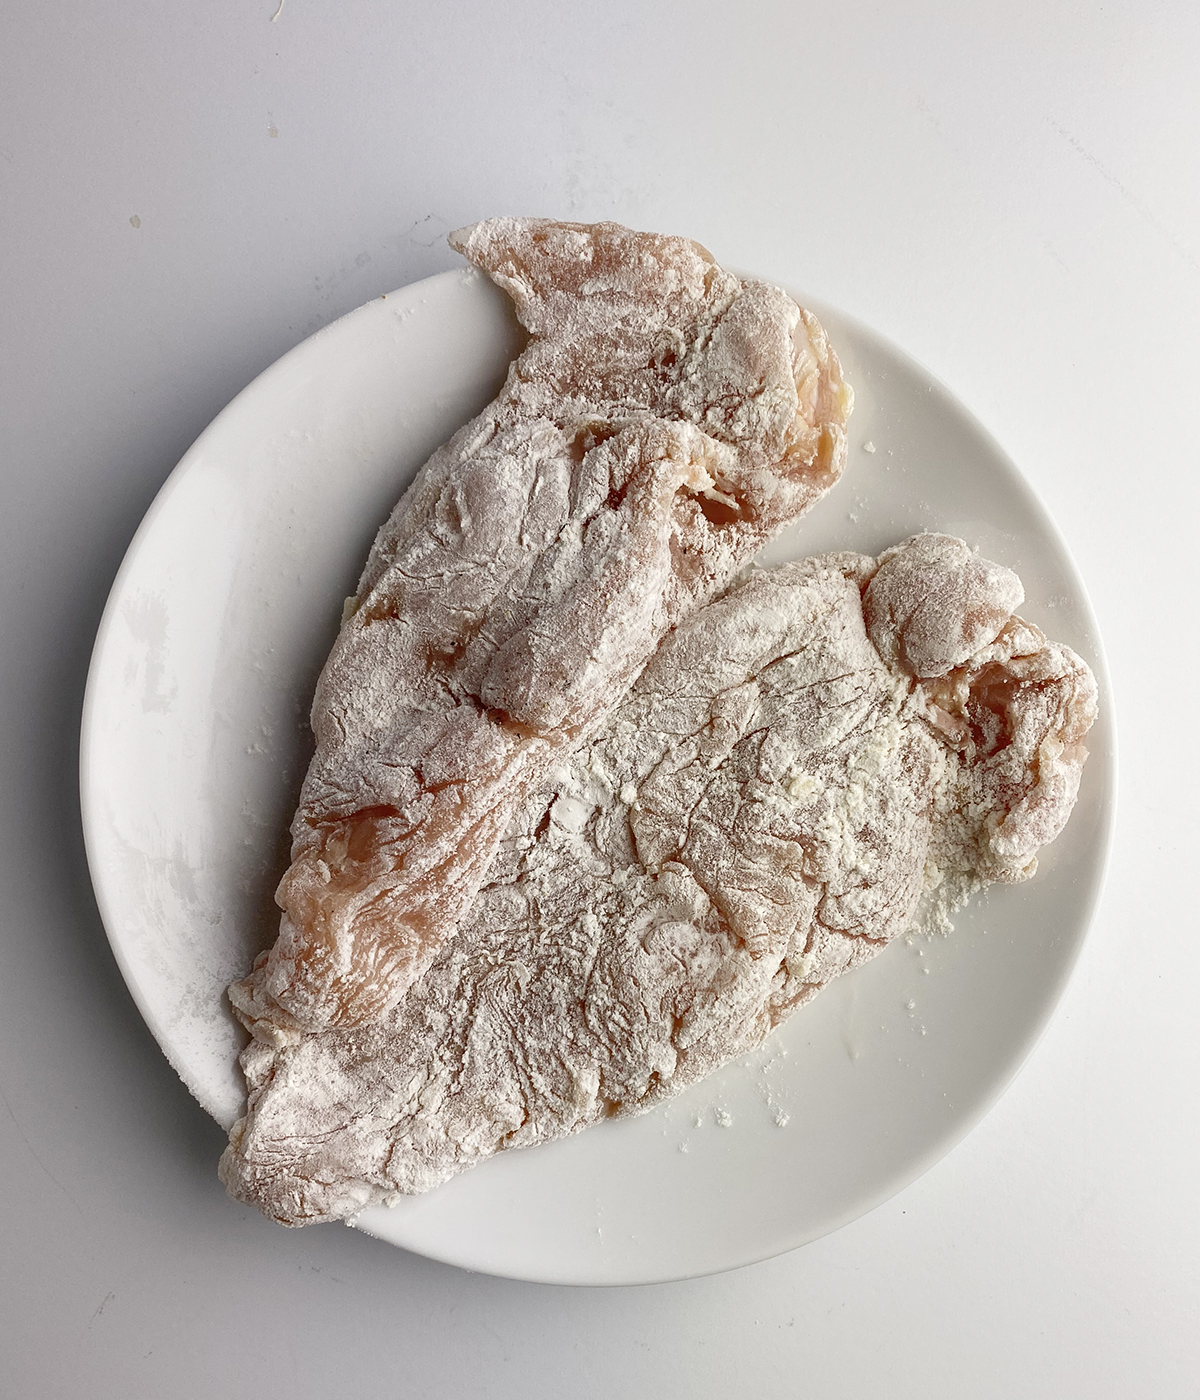 Flour dredged chicken breasts on a plate.